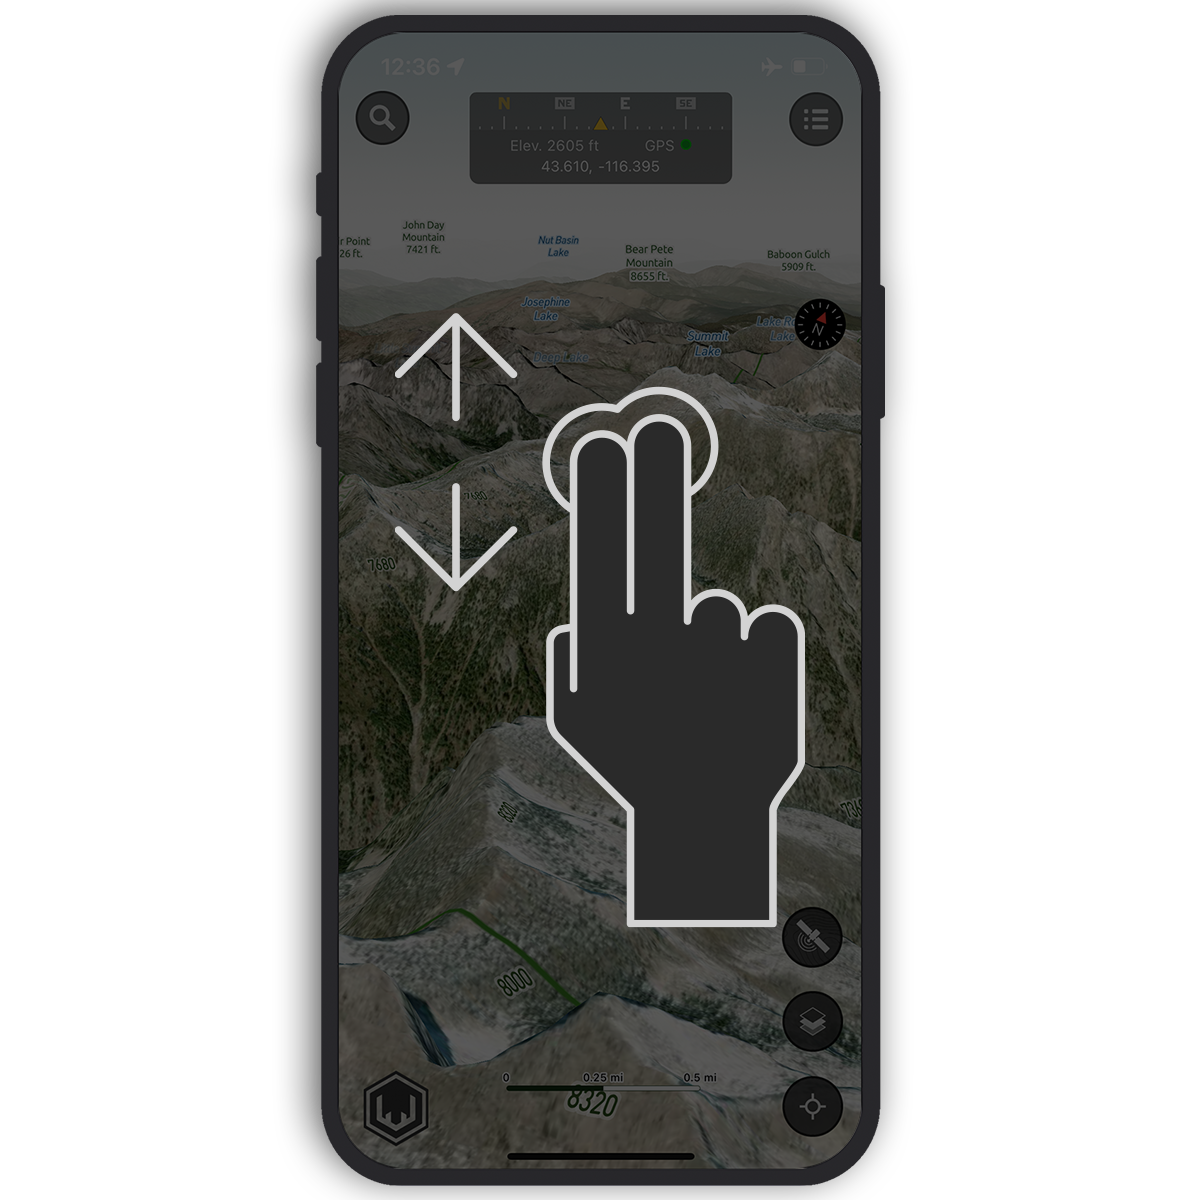 Swipe up or down on your map screen with two simultaneous touch points to tilt your map with a full 90°-range of tilt.